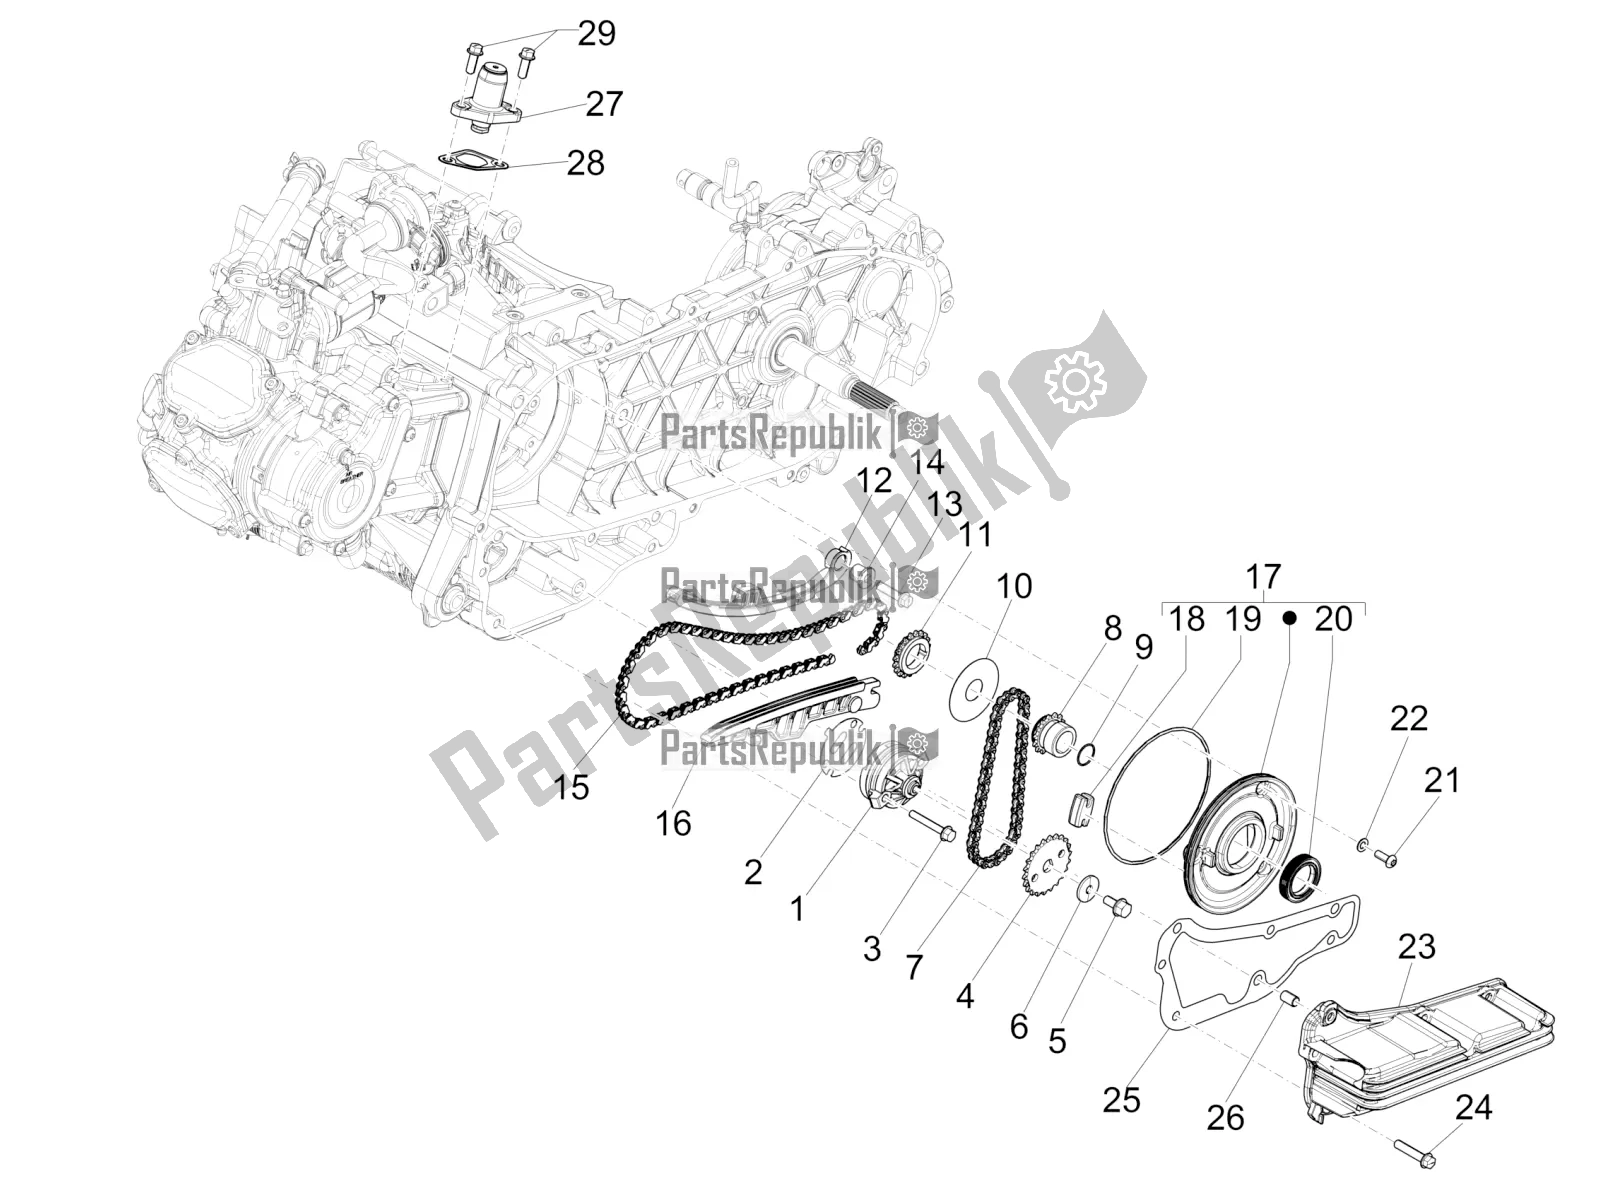 All parts for the Oil Pump of the Vespa GTS 125 Super ABS 2020